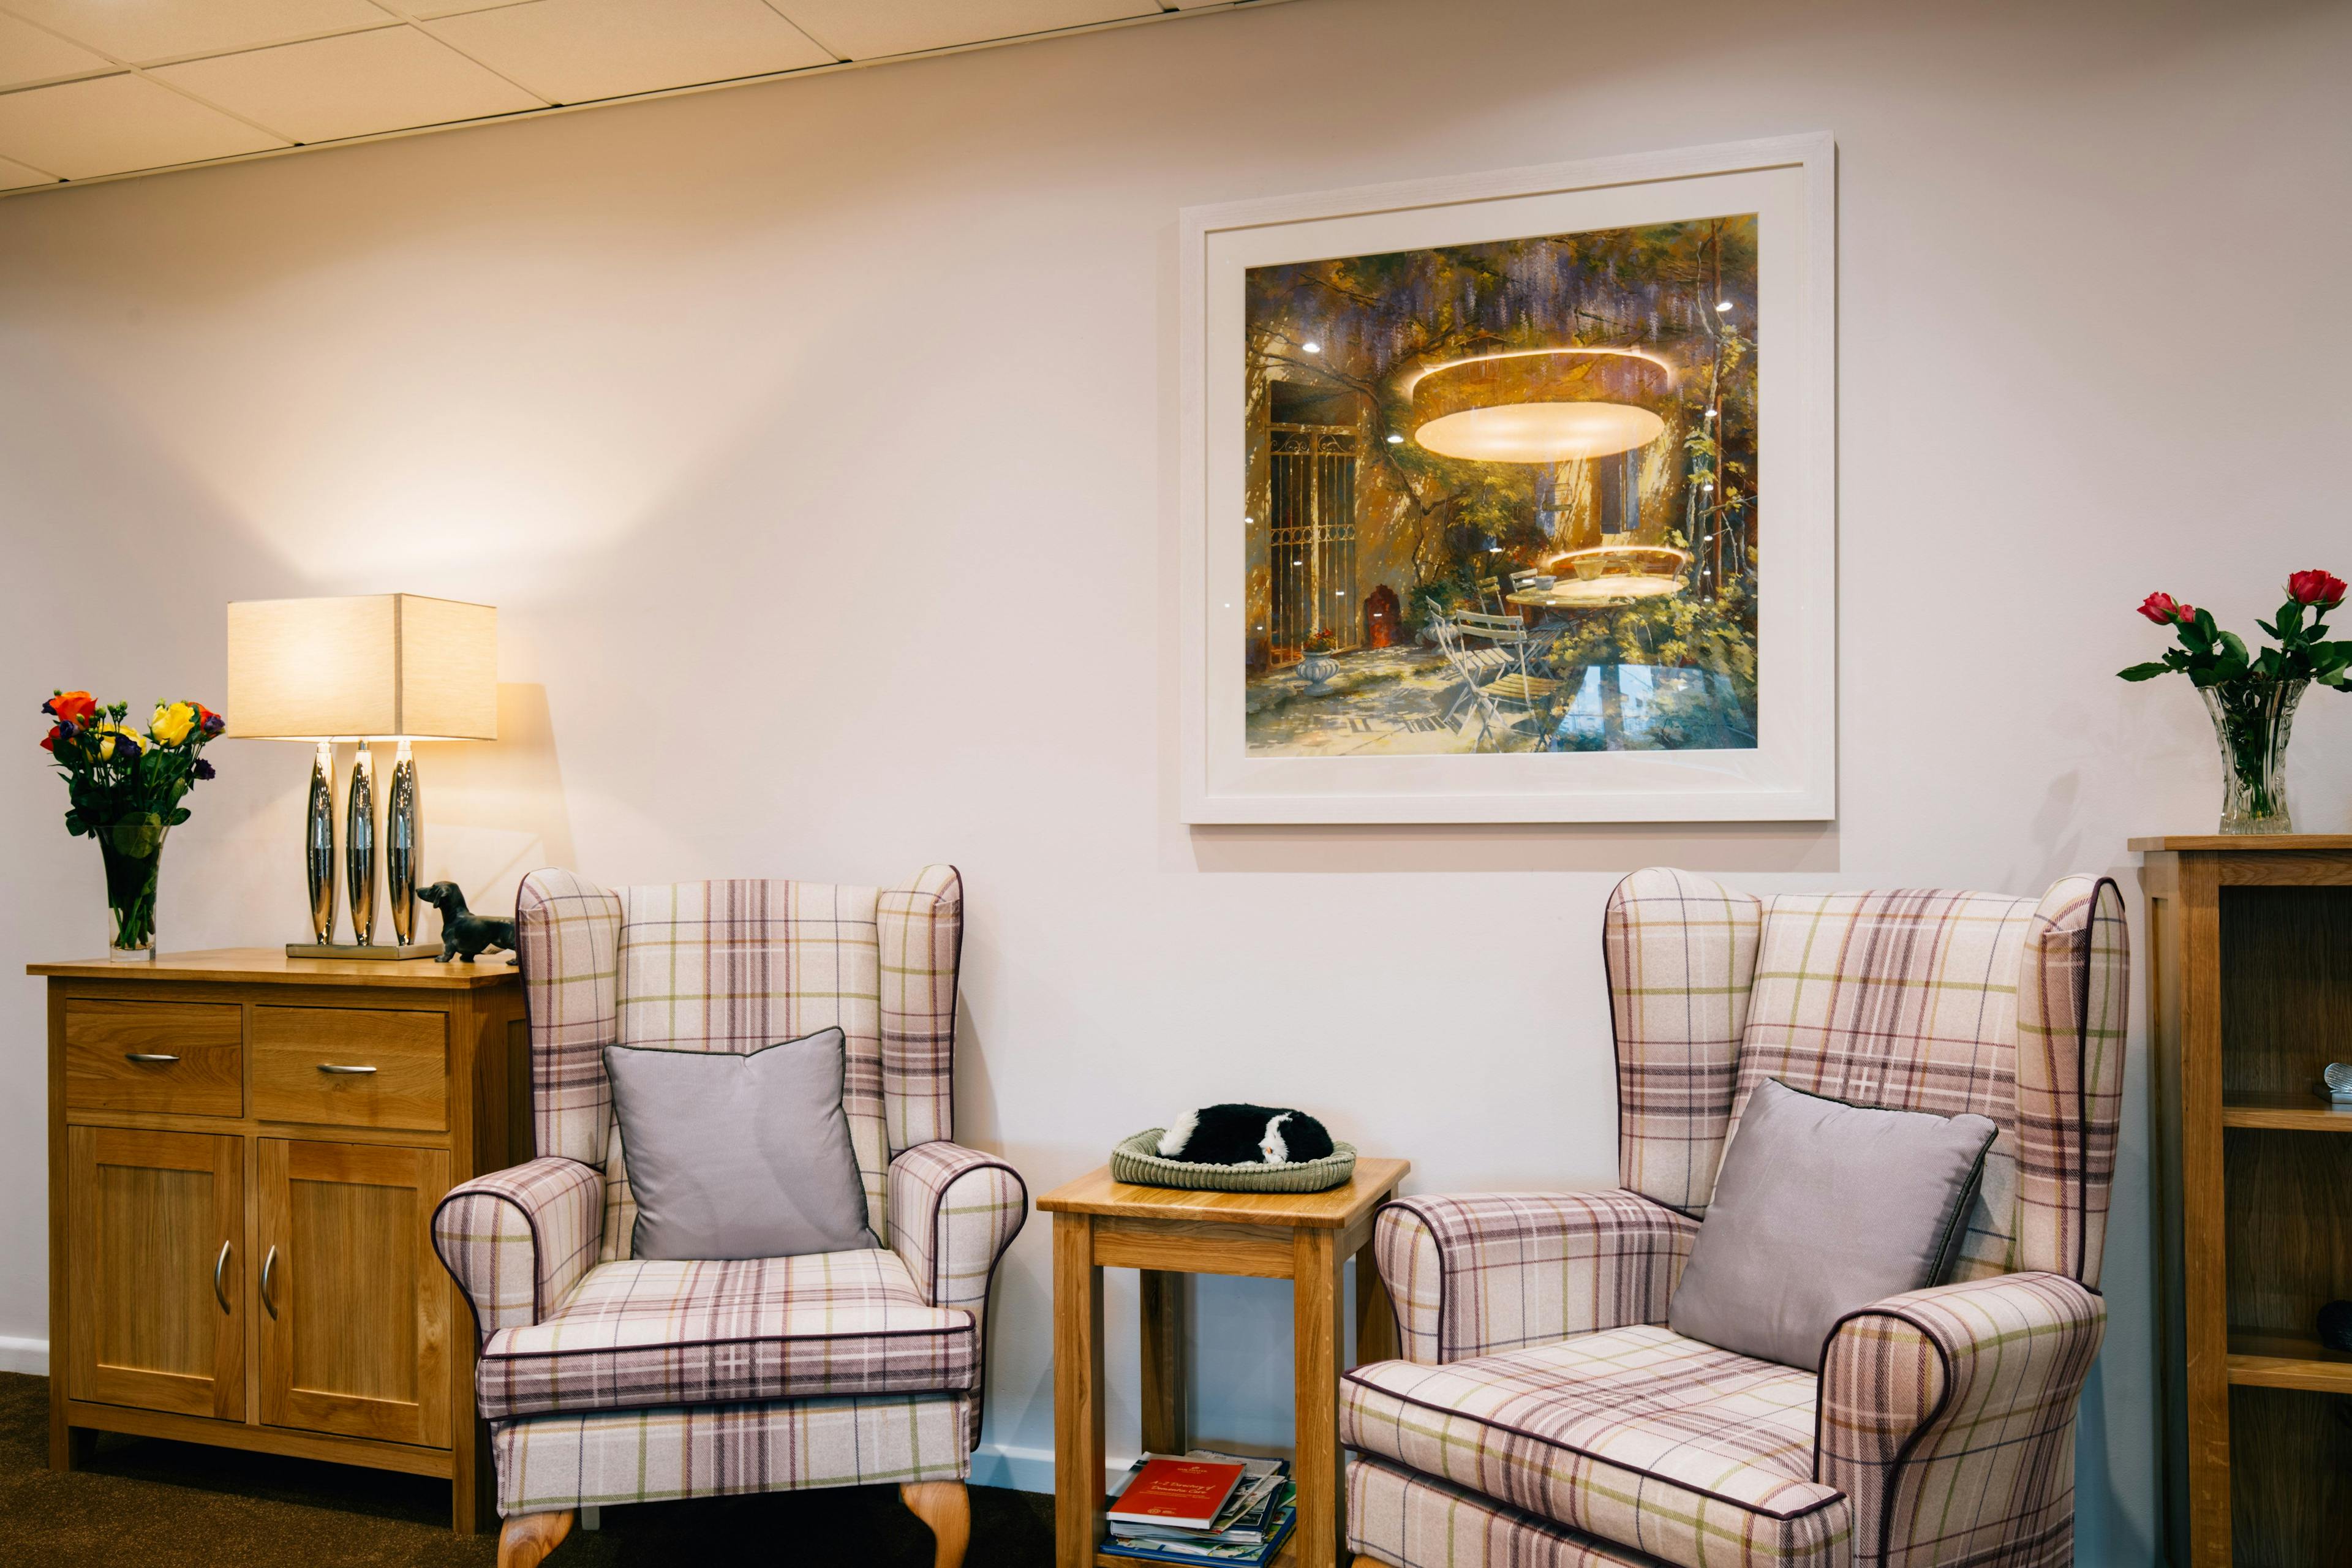 Communal Lounge at Lucerne House Care Home in Exeter, Devon